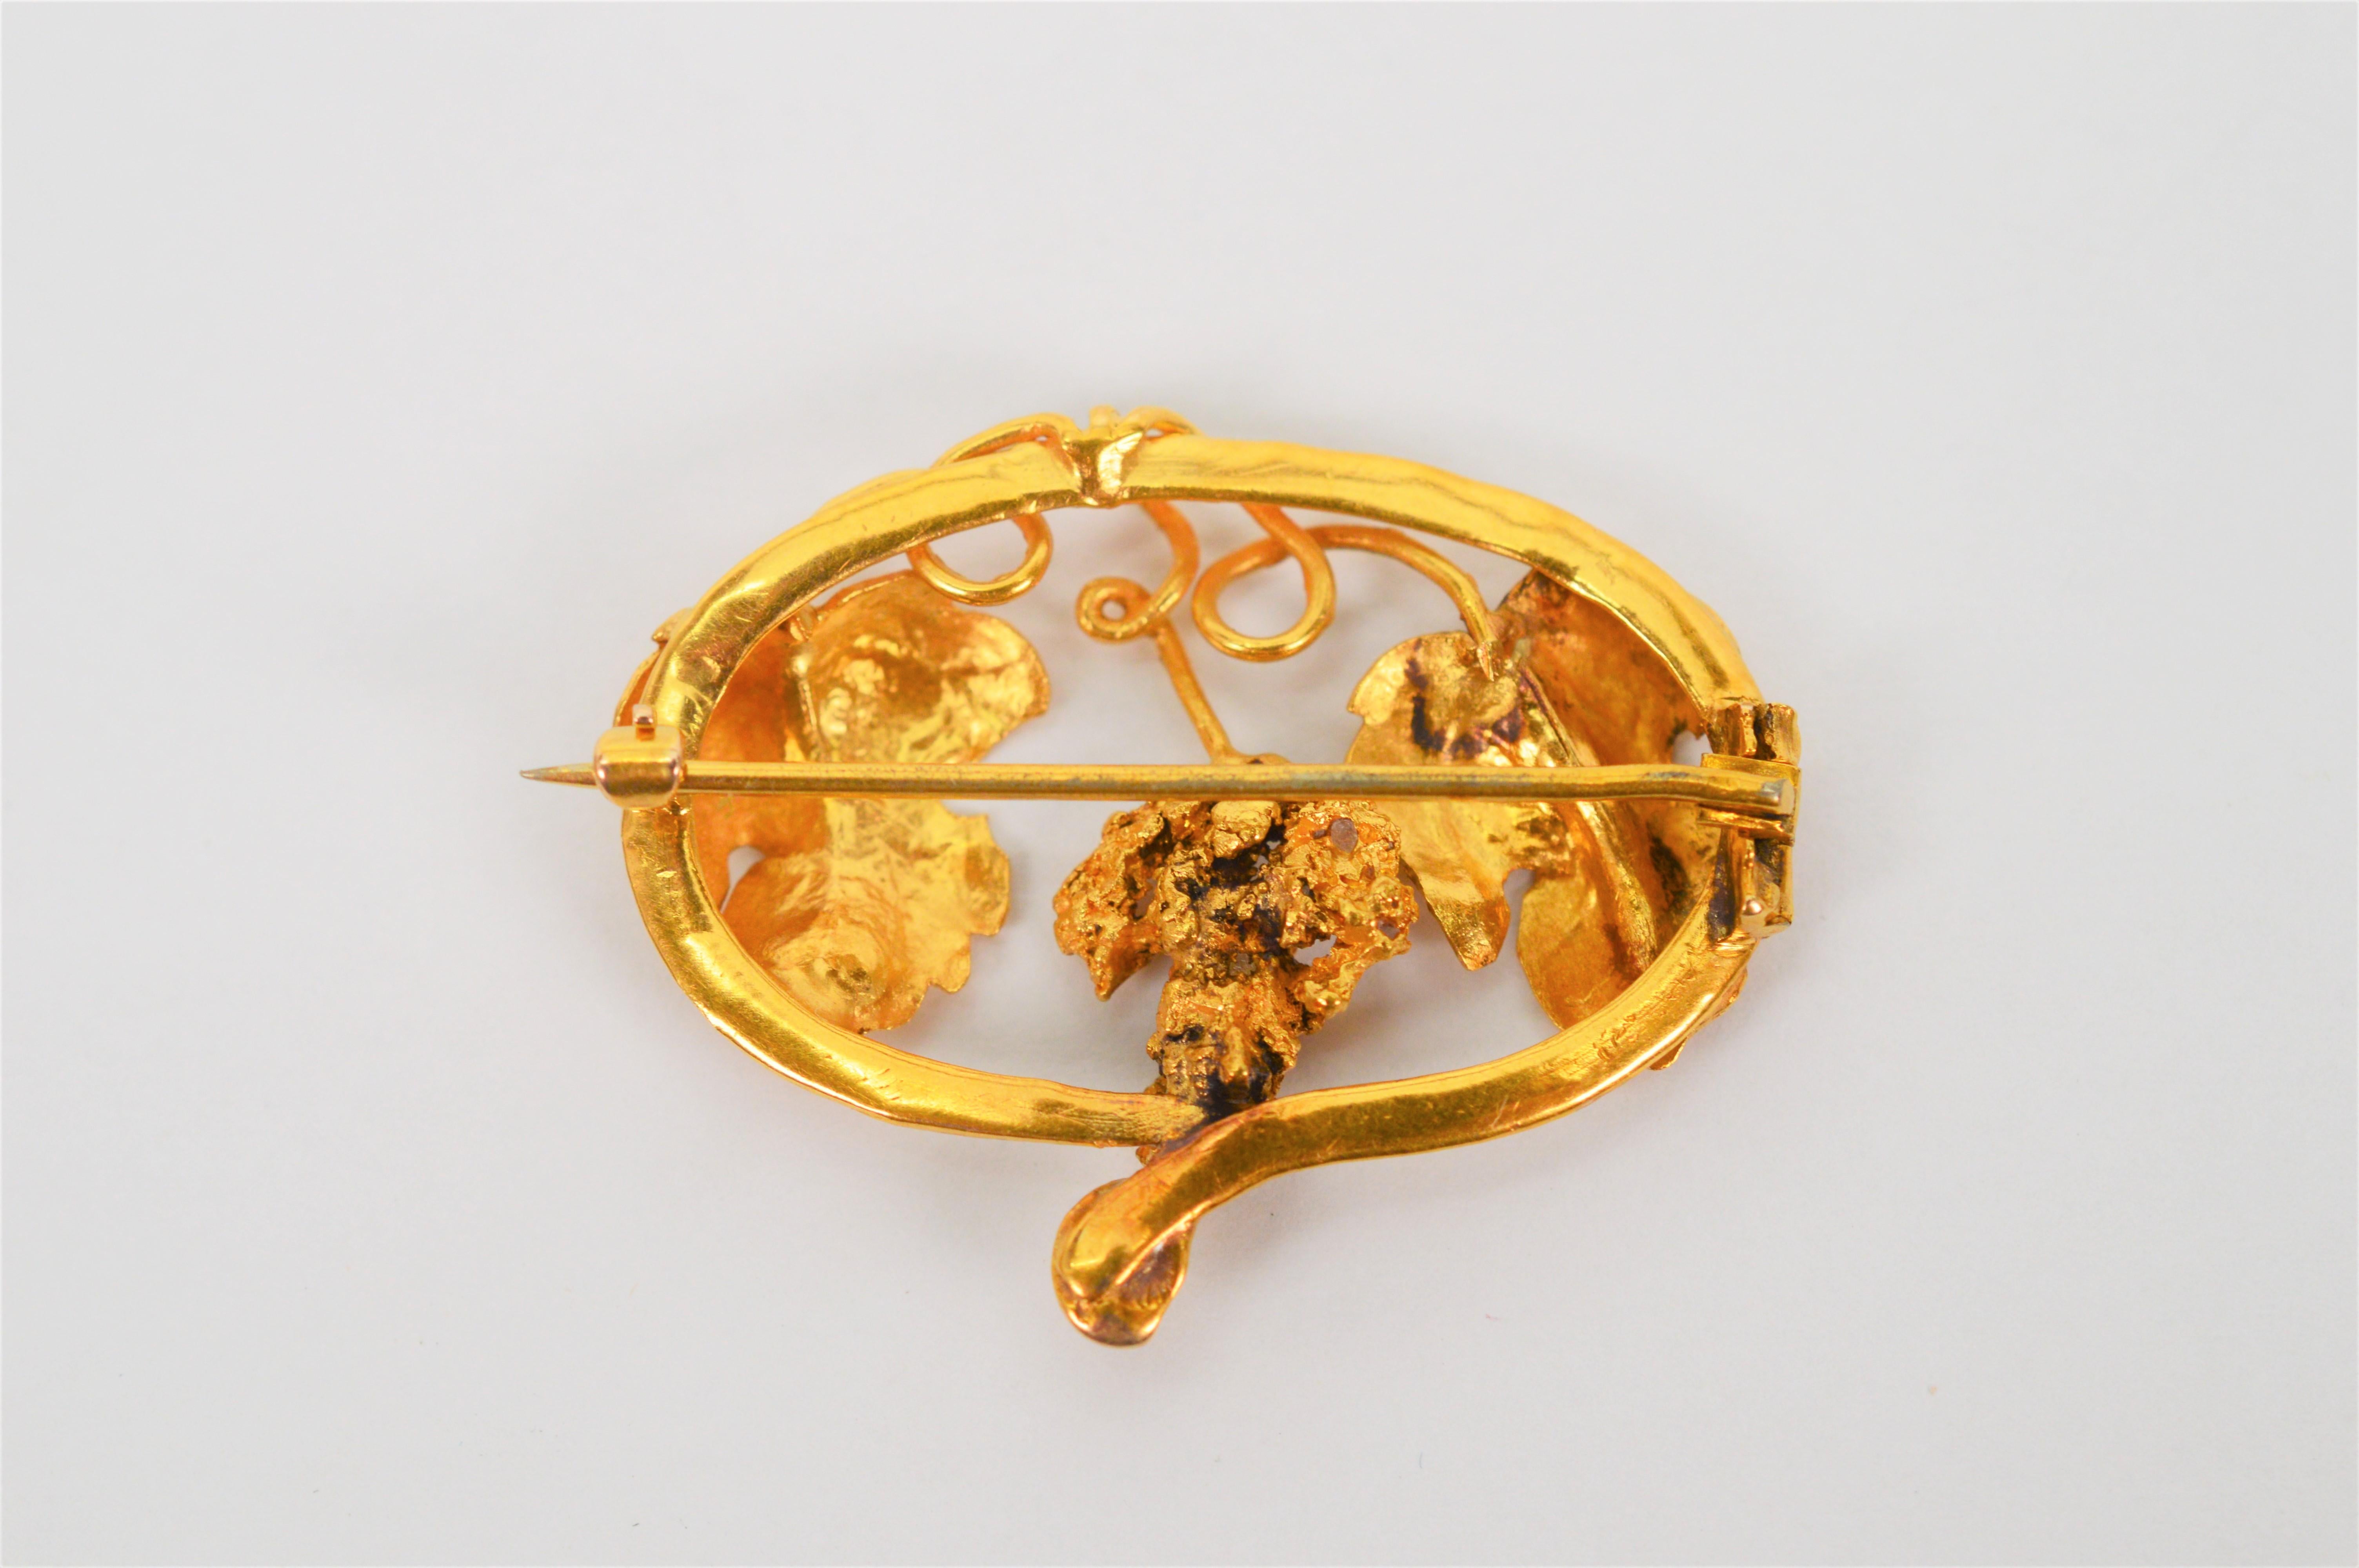 Antique 21 Karat Yellow Gold Grape Vine Brooch In Excellent Condition For Sale In Mount Kisco, NY